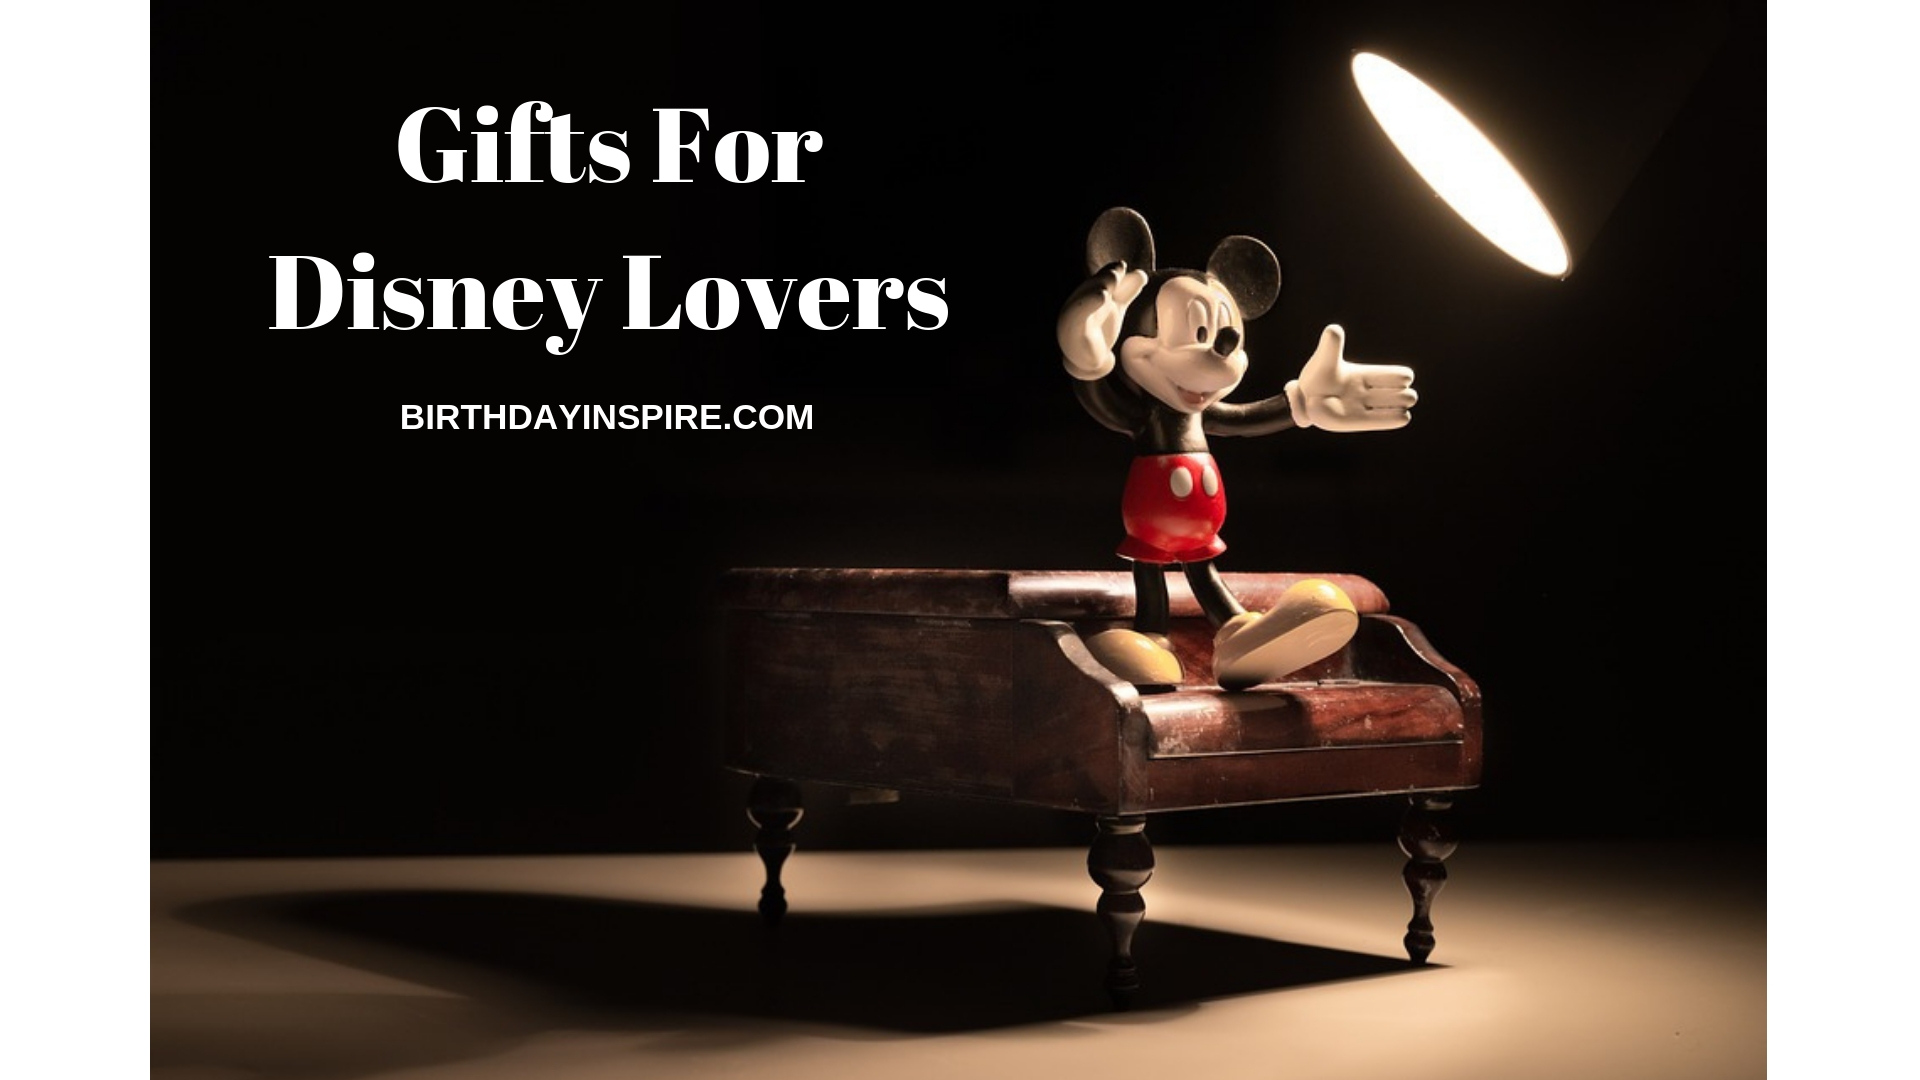 GIFTS FOR DISNEY LOVERS